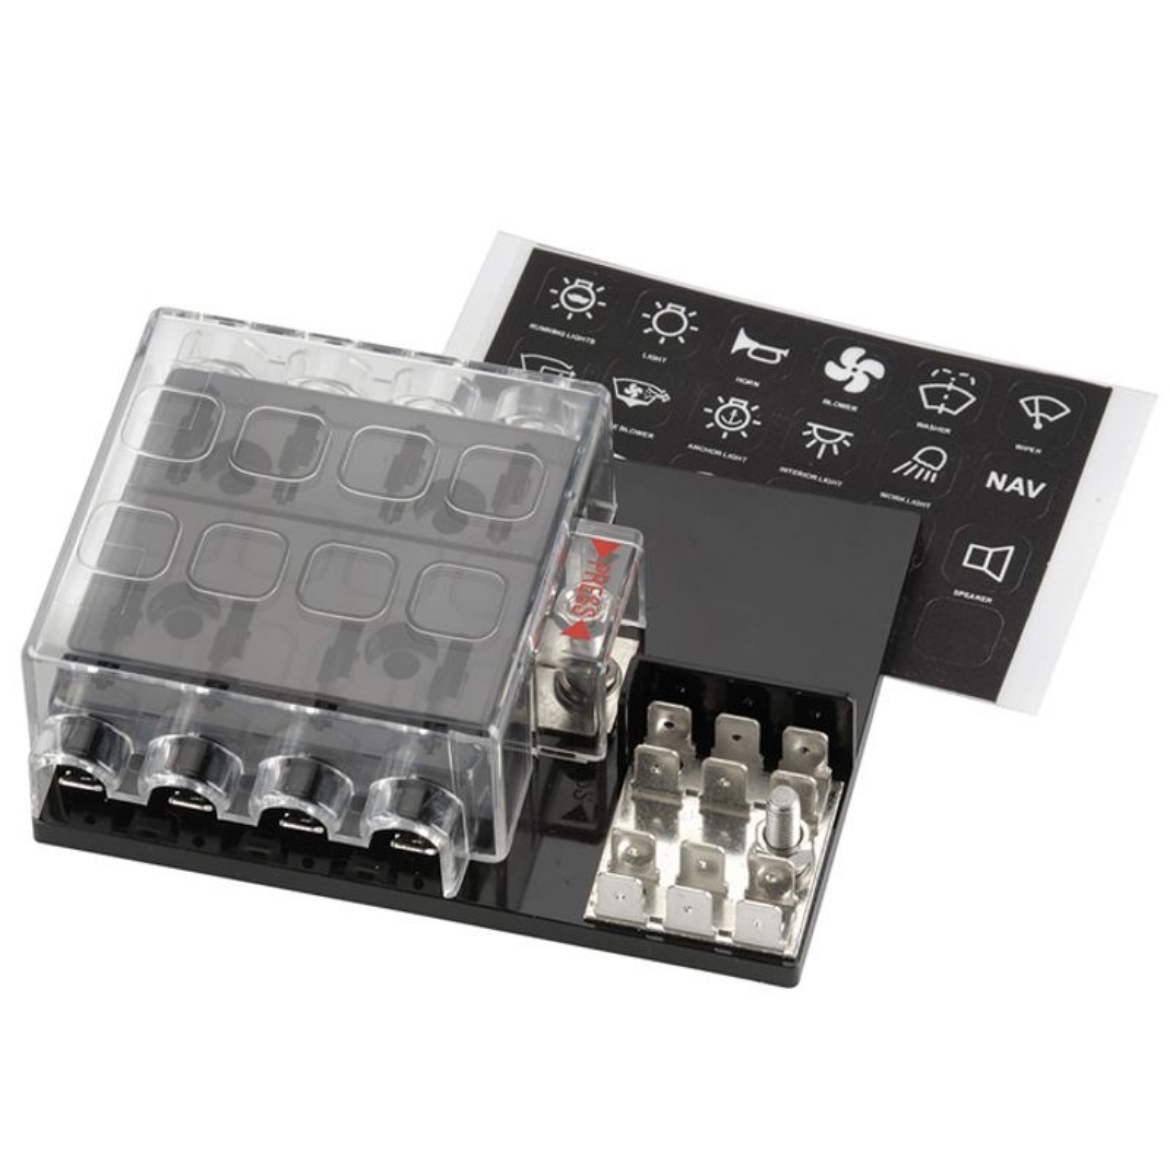 Picture of FUSE DISTRIBUTION BOX 8 WAY STANDARD ATS BLADE WITH GROUND AND CLEAR COVER